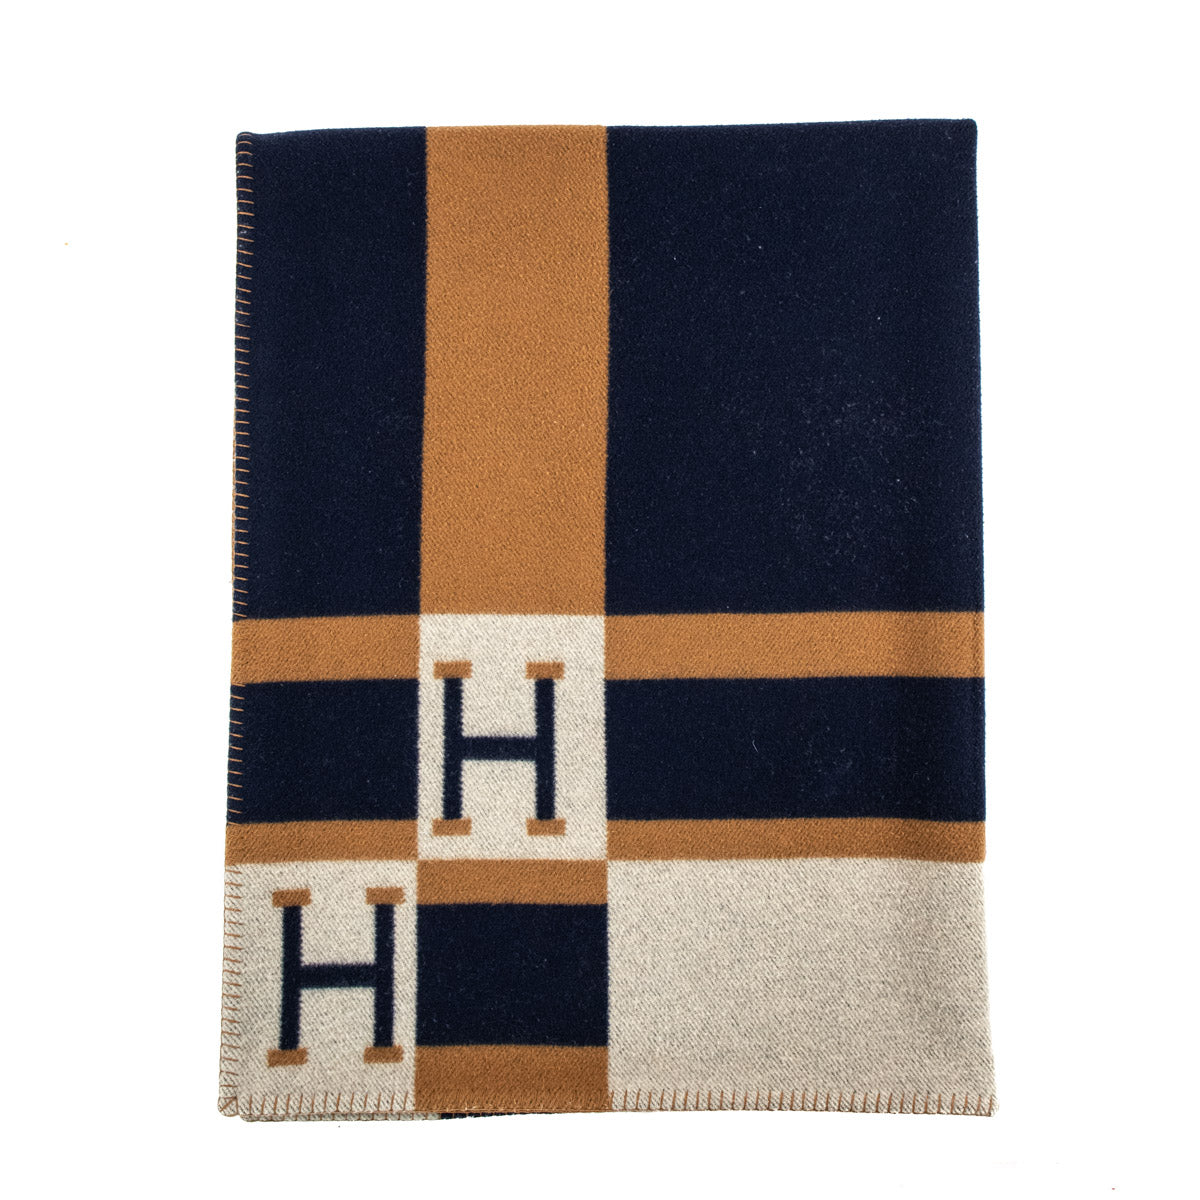 Hermes Camel & Navy Wool & Cashmere Avalon Blanket - Love that Bag etc - Preowned Authentic Designer Handbags & Preloved Fashions